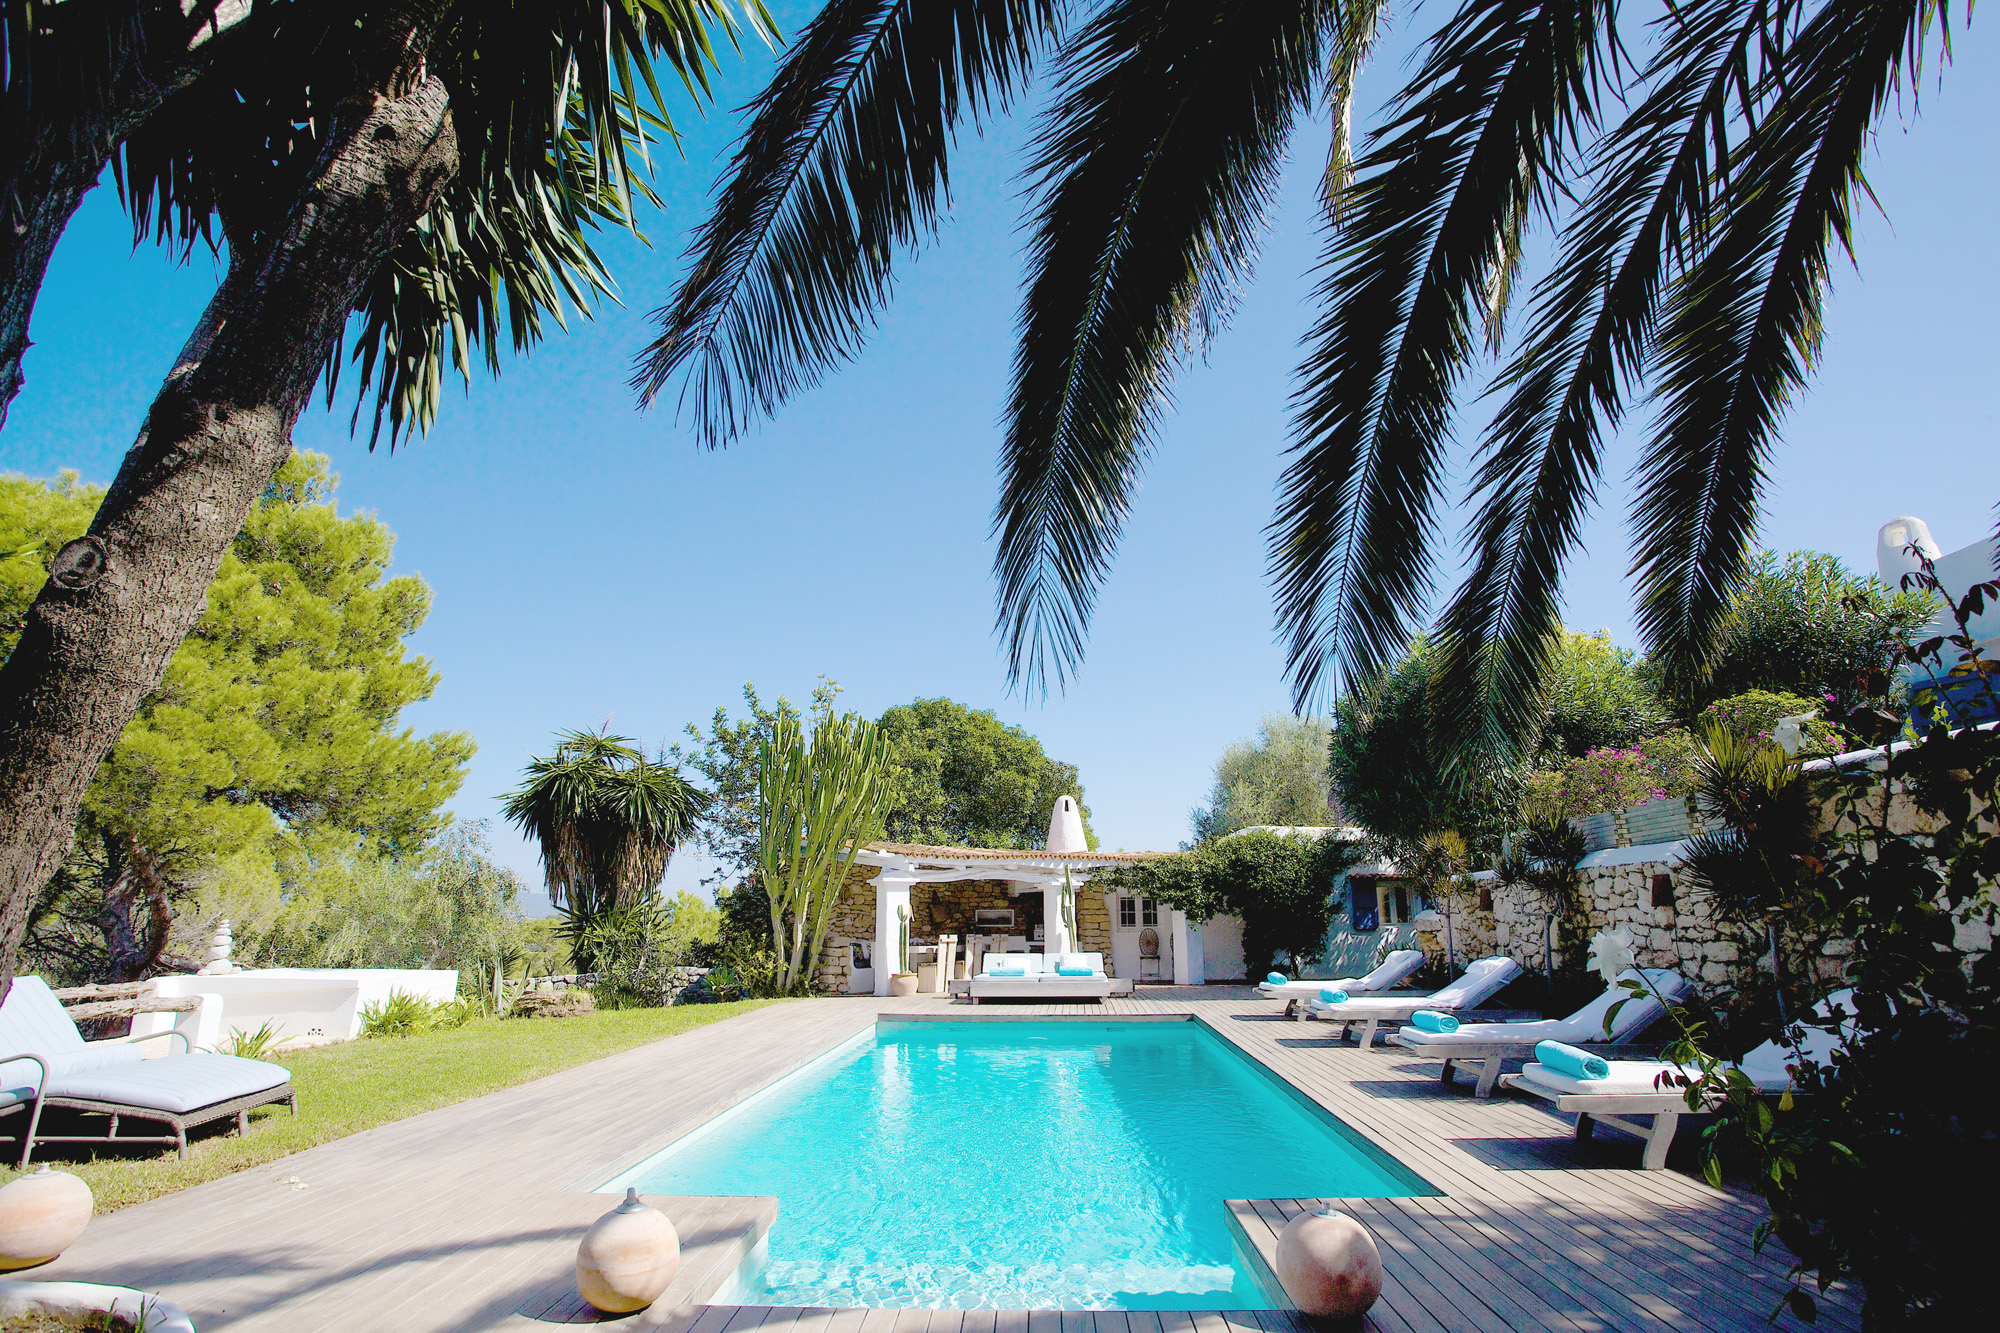 Flanked by greenery, the pool of a luxury villa in Ibiza